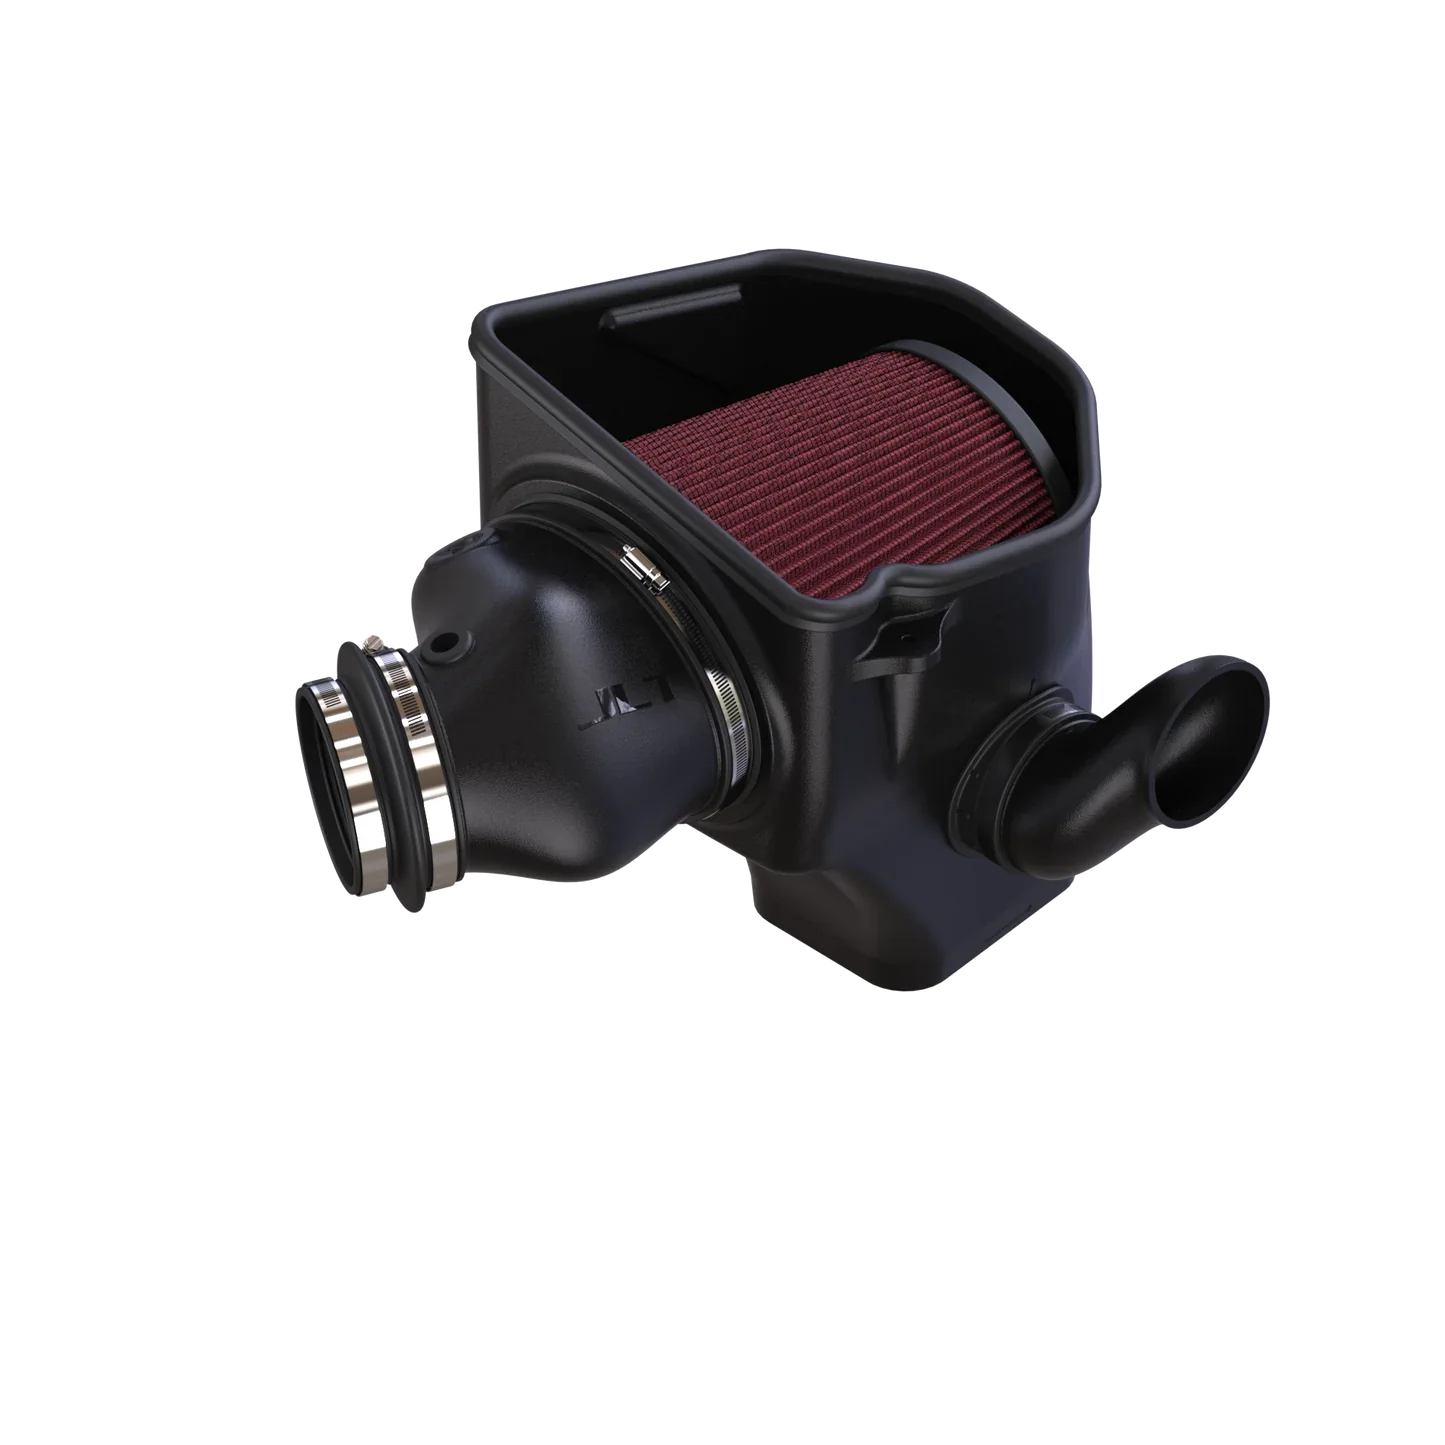 JLT COLD AIR INTAKE FOR 2017-2020 CHARGER HELLCAT & 2017-2018 CHALLENGER HELLCAT